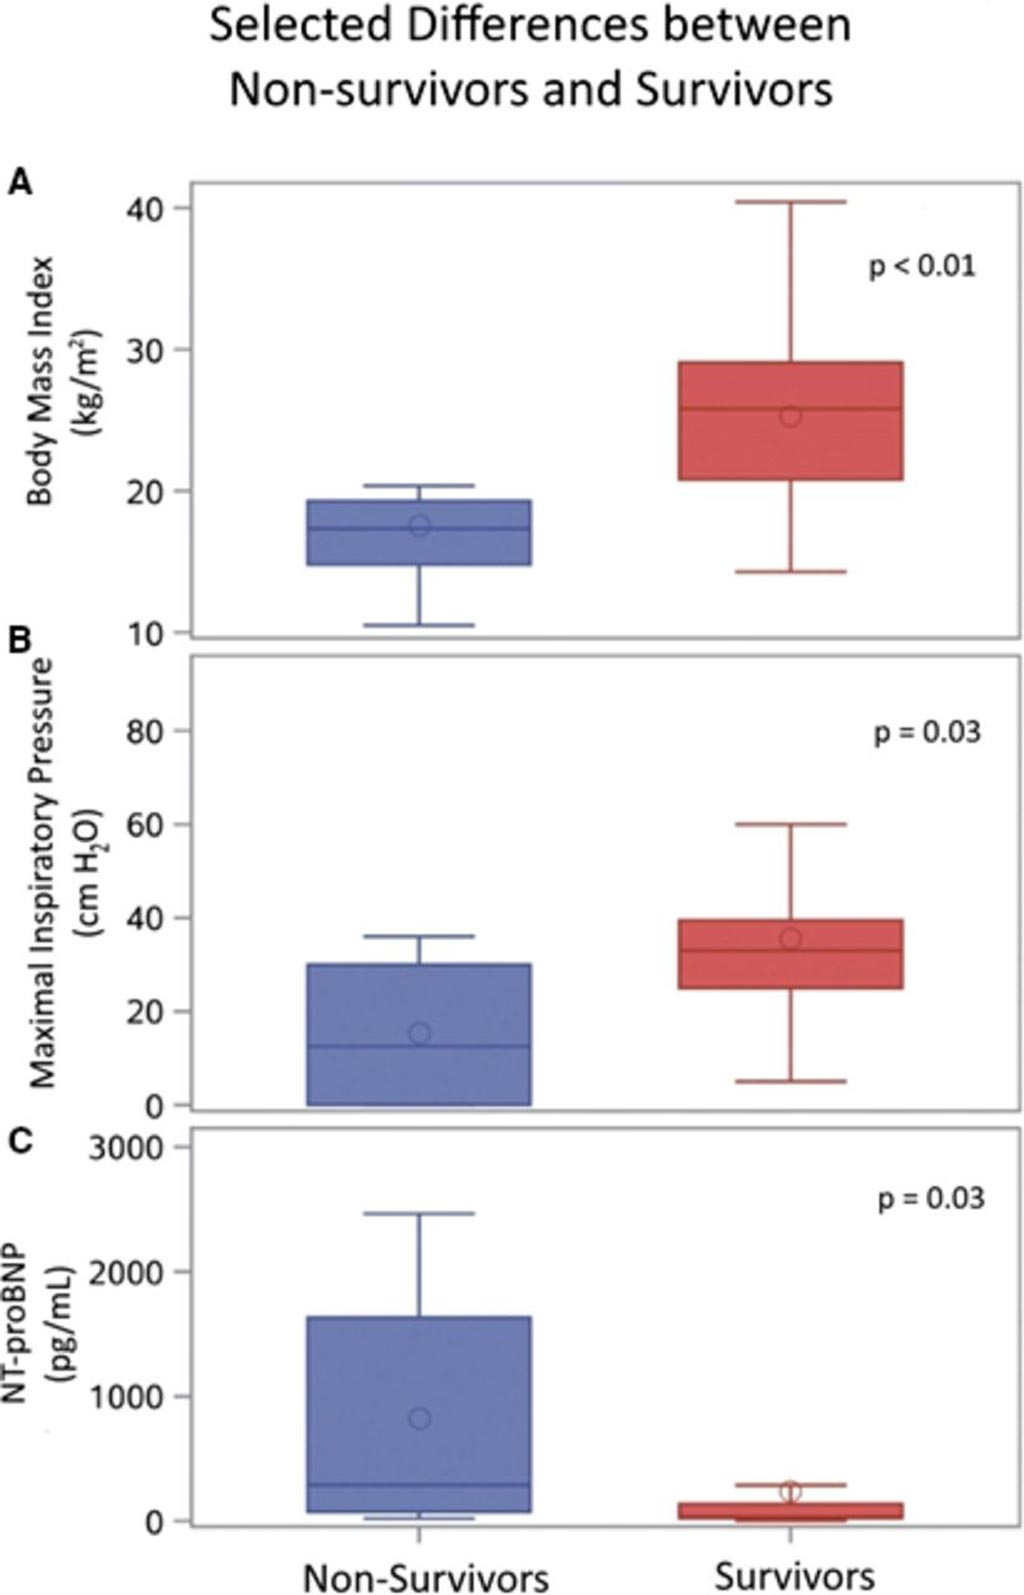 Image: Box‐and‐whisker plot comparisons between nonsurvivors (n=8) and survivors (n=35) by: (A) body mass index, (B) maximal inspiratory pressure, and (C) N‐terminal pro‐brain natriuretic peptide (NT‐proBNP) (Photo courtesy of Cheeran D et al, 2017, Journal of the American Heart Association).